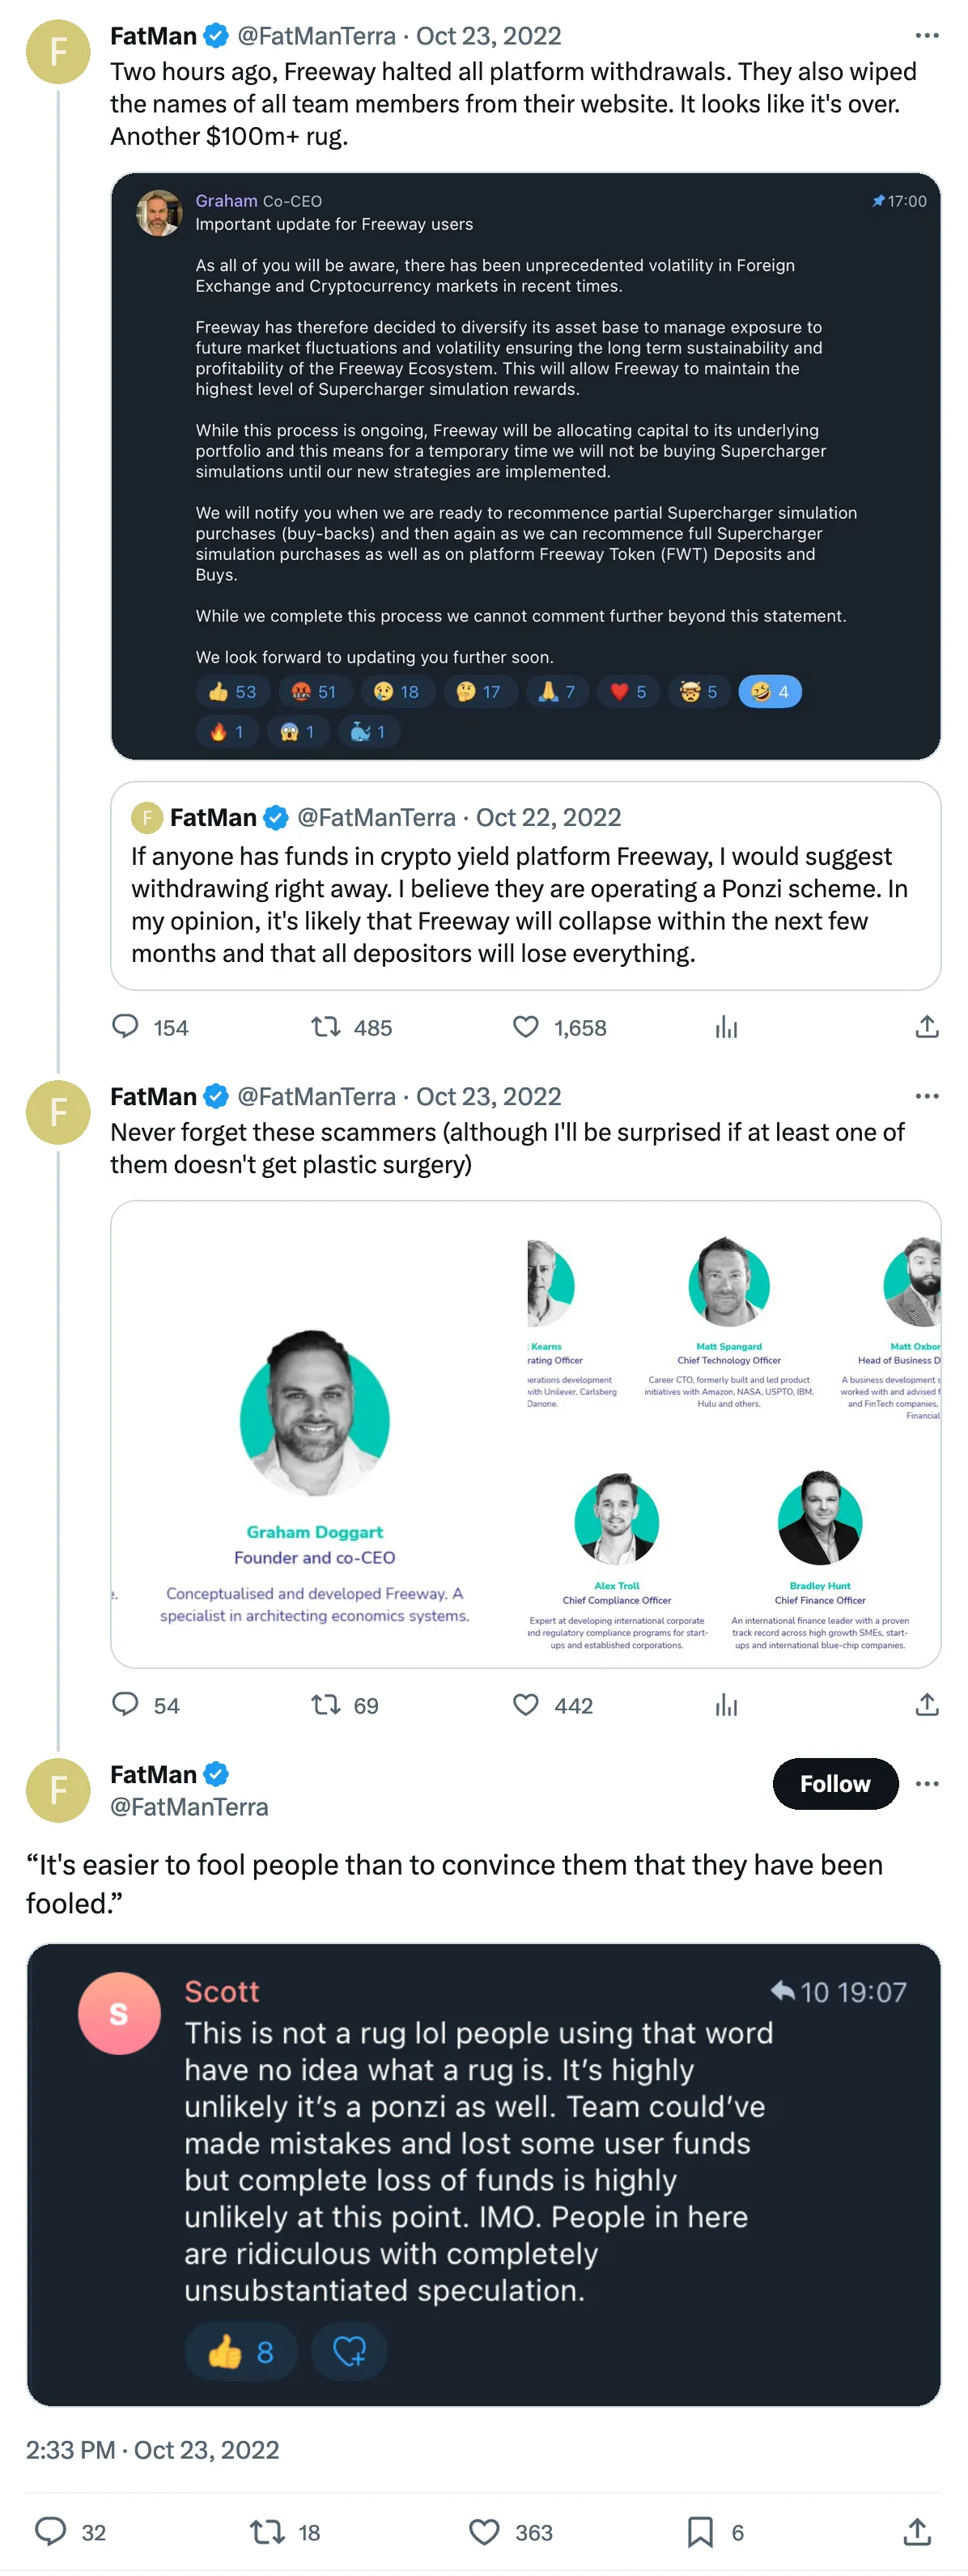 Two hours ago, Freeway halted all platform withdrawals. They also wiped the names of all team members from their website. It looks like it's over. Another $100m+ rug. 
Tweeted at Oct 22, 2022

Never forget these scammers (although I'll be surprised if at least one of them doesn't get plastic surgery) 
Tweeted at Oct 23, 2022

“It's easier to fool people than to convince them that they have been fooled.” 
Tweeted at Oct 23, 2022